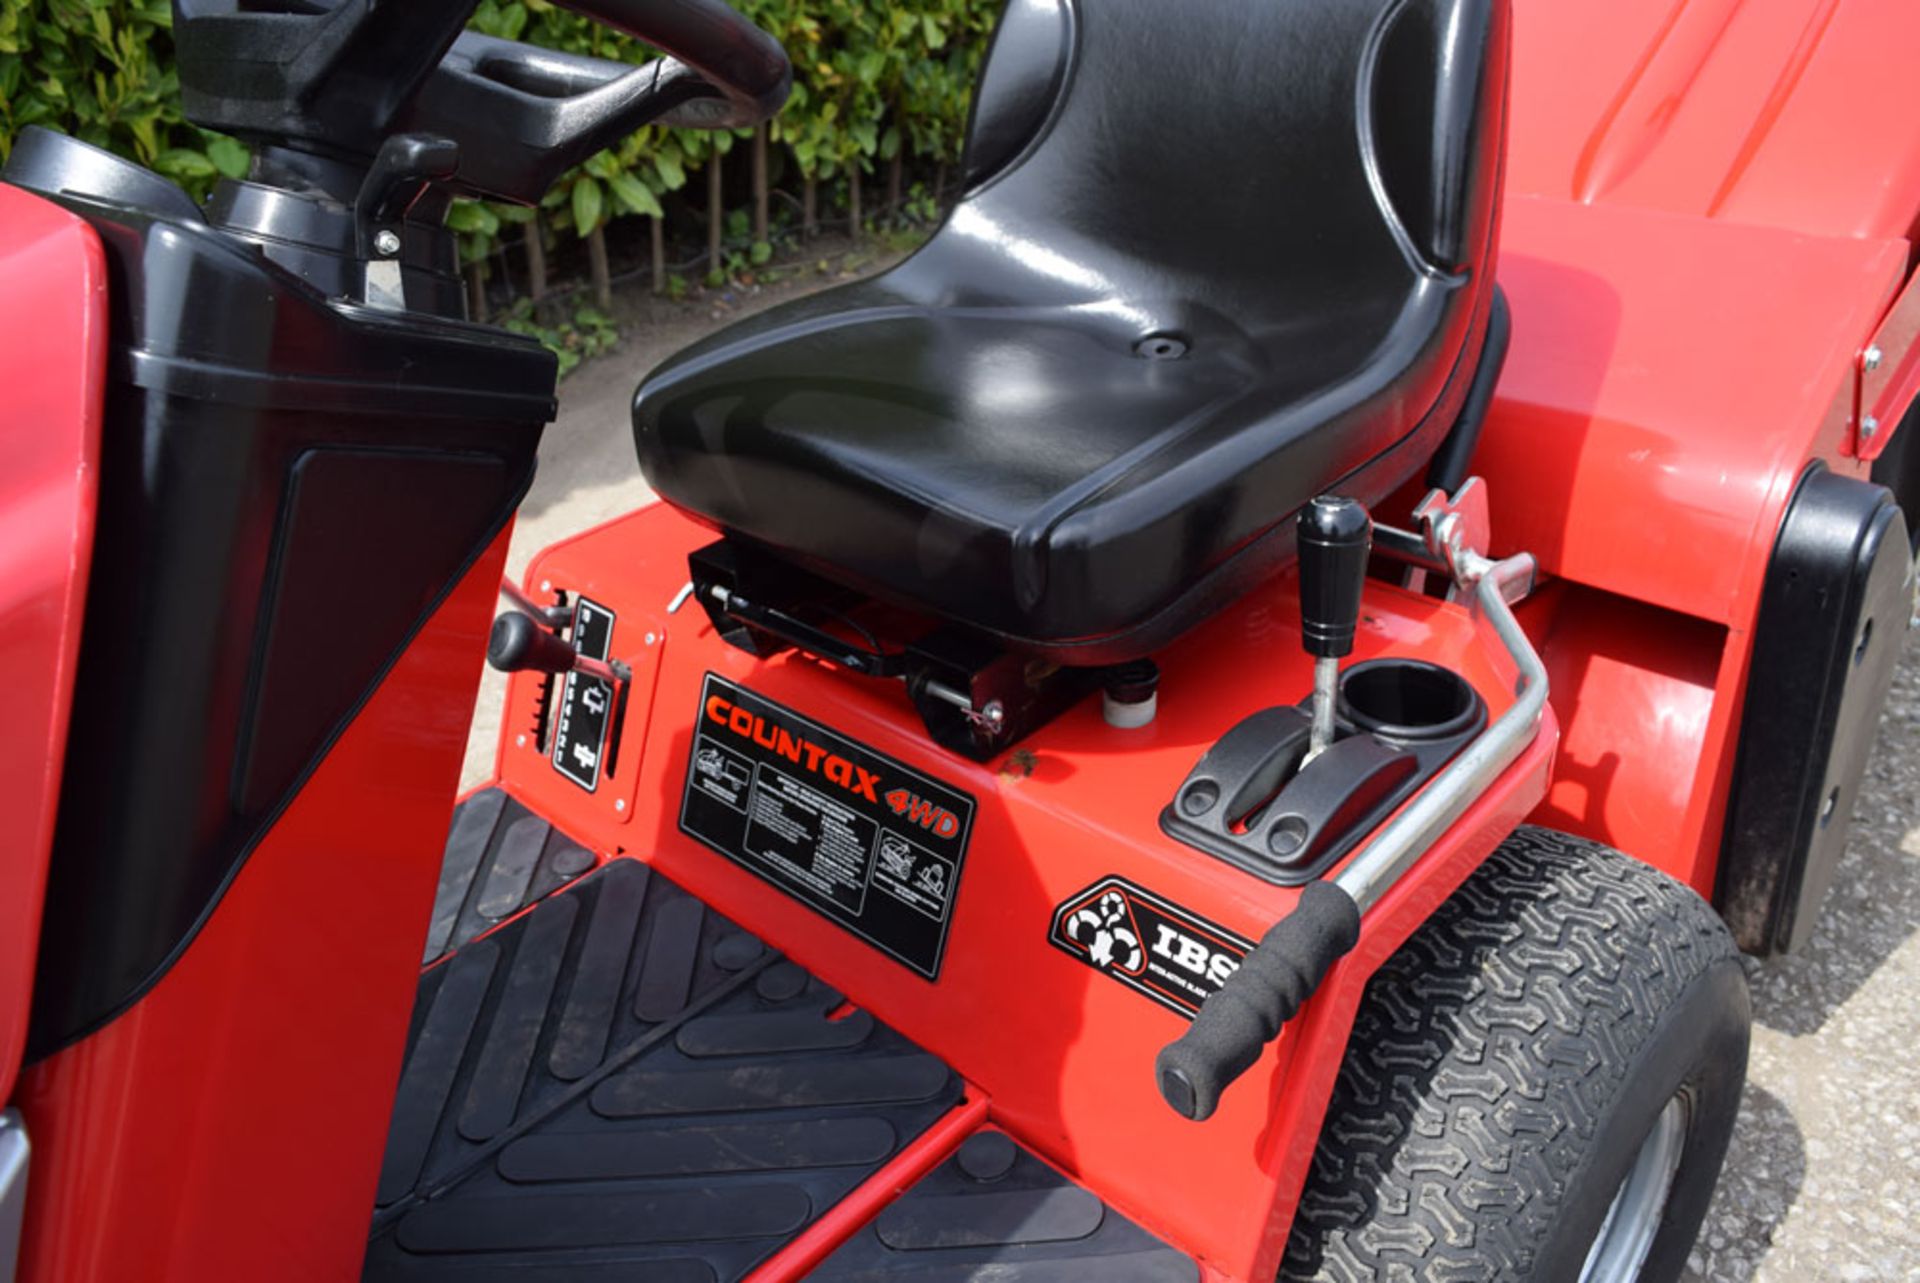 2010 Countax C600H 4WD 40" Rear Discharge Garden Tractor With PGC - Image 5 of 6